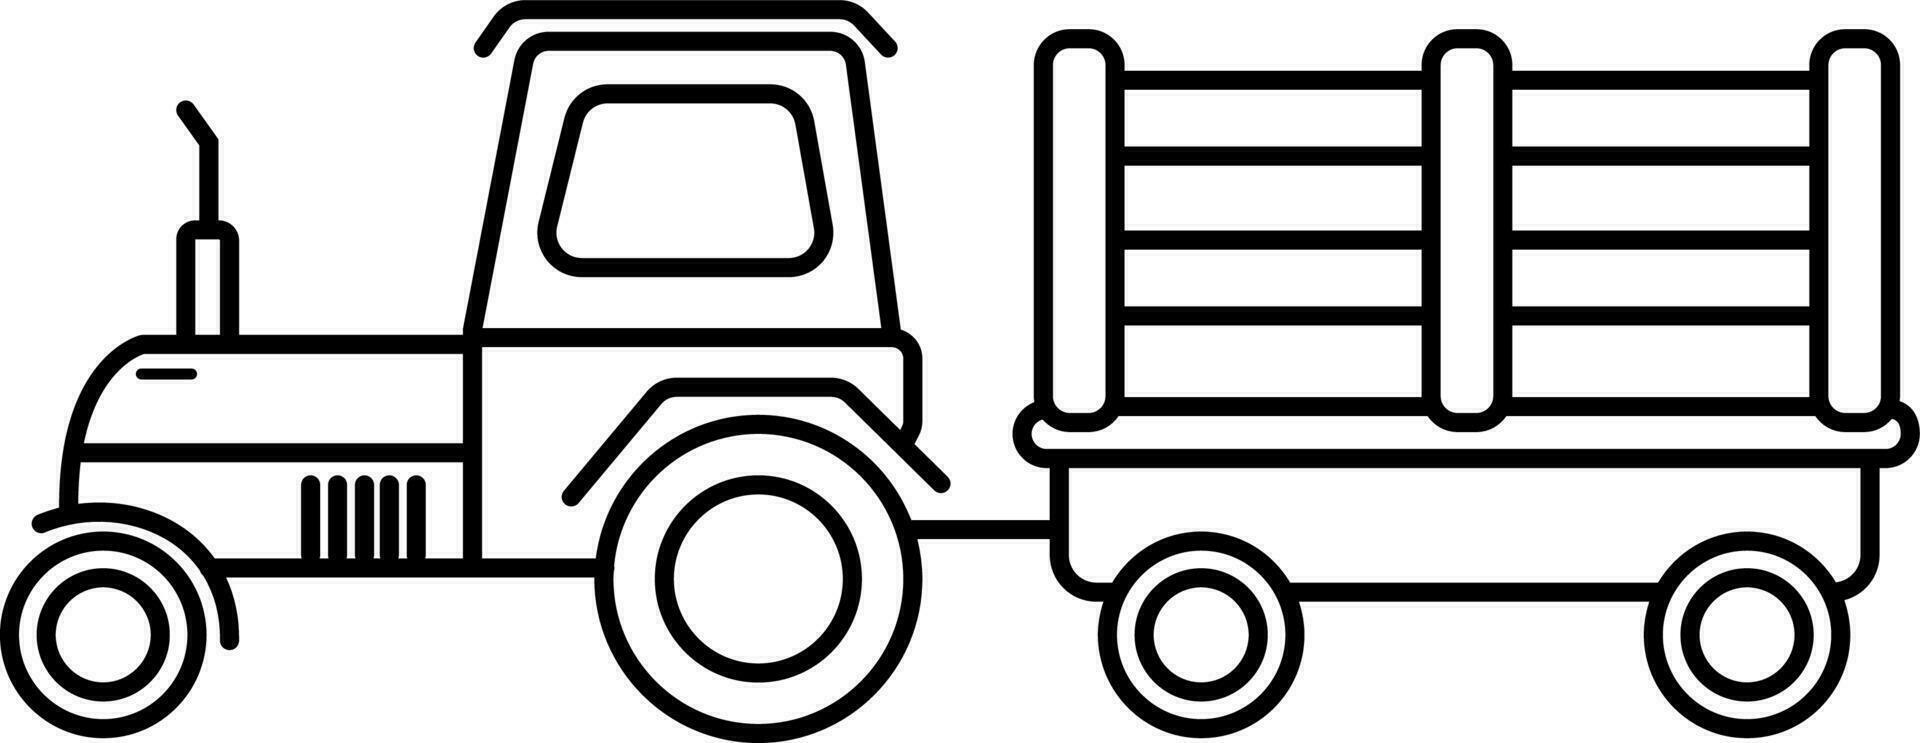 Line art illustration of a Tractor. vector